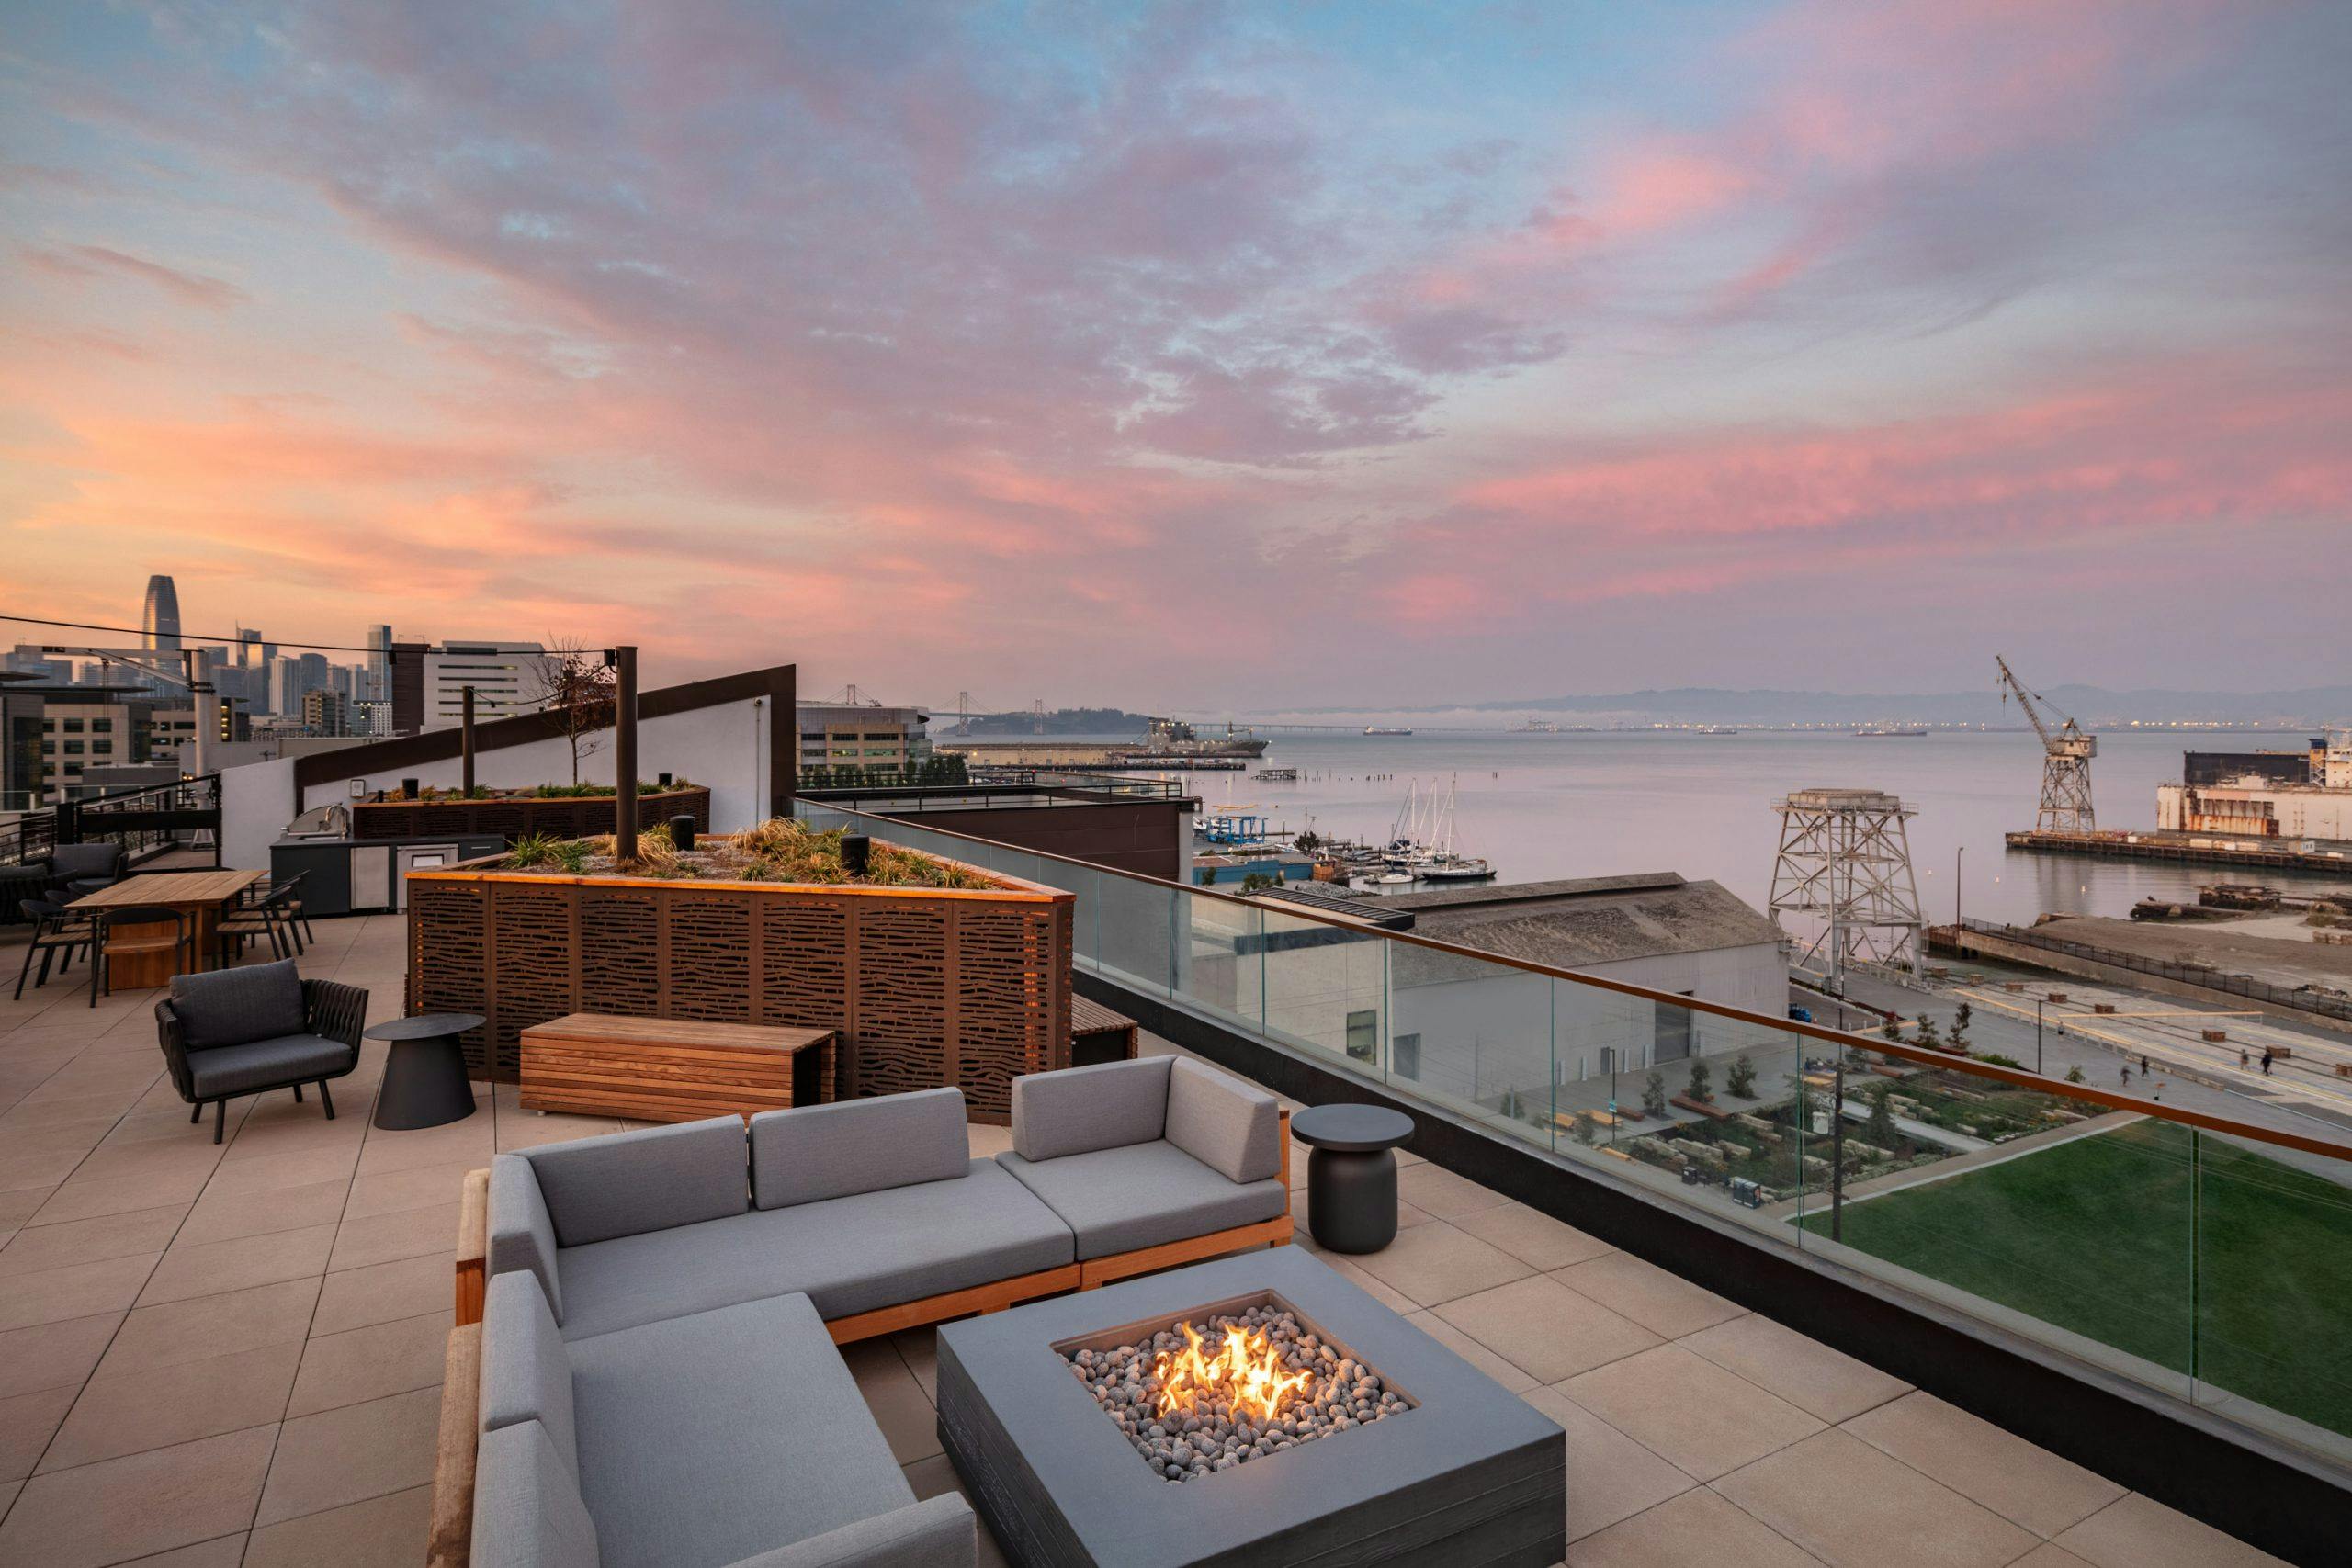 The rooftop terrace of 2177 Third has up-close views of the gorgeous Bay waterfront and distant views of the San Francisco city skyline. 